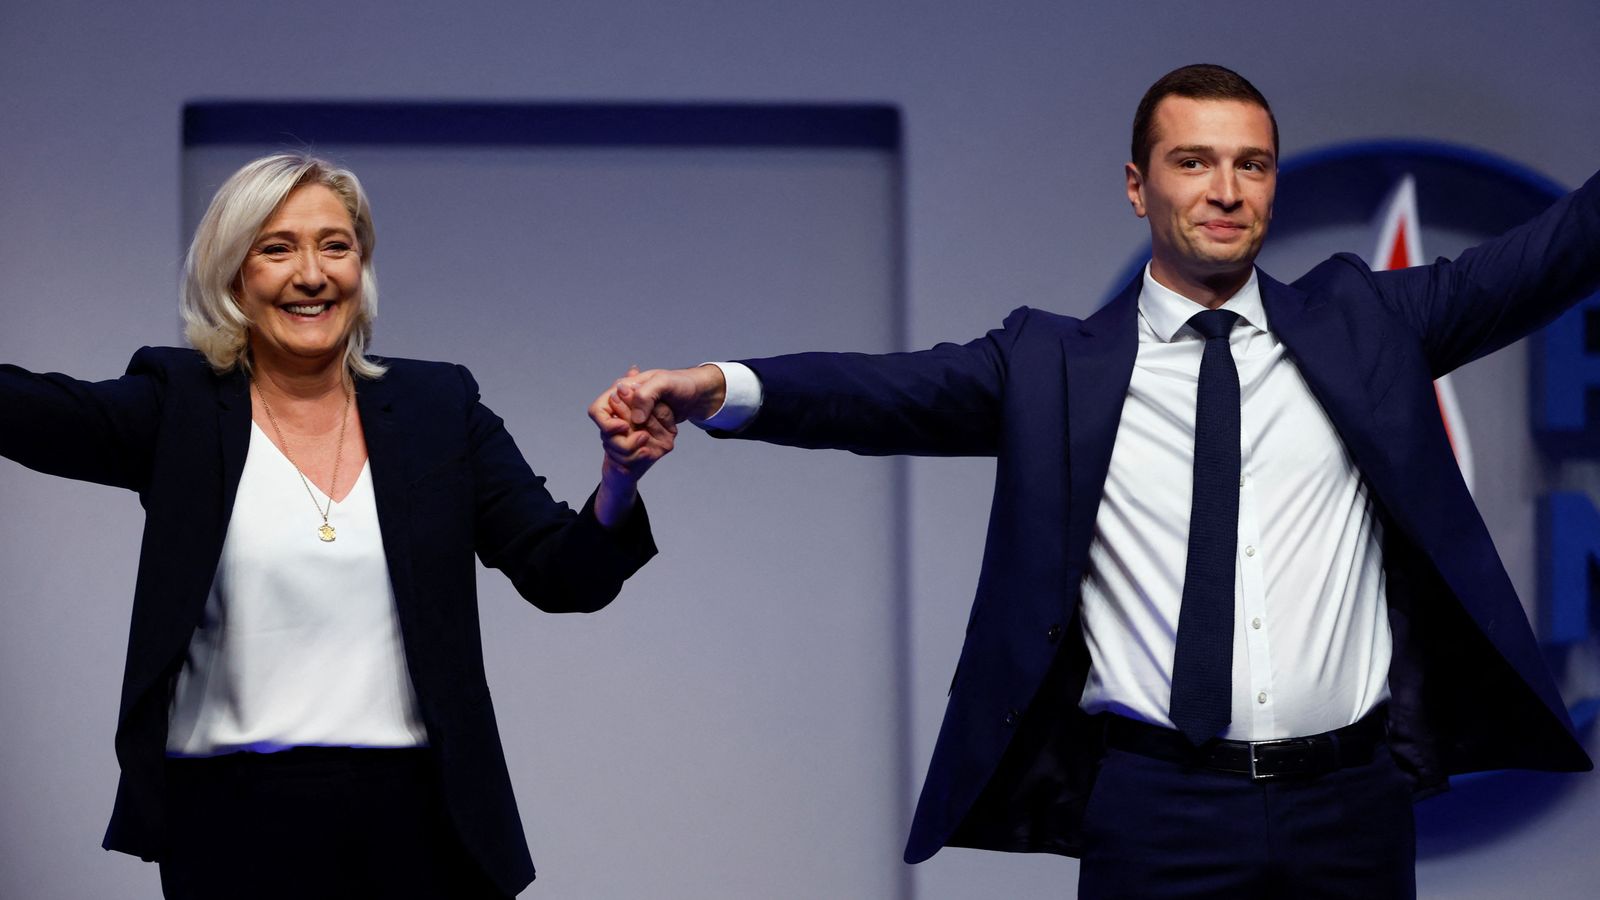 Marine Le Pen replaced as head of France's National Rally party